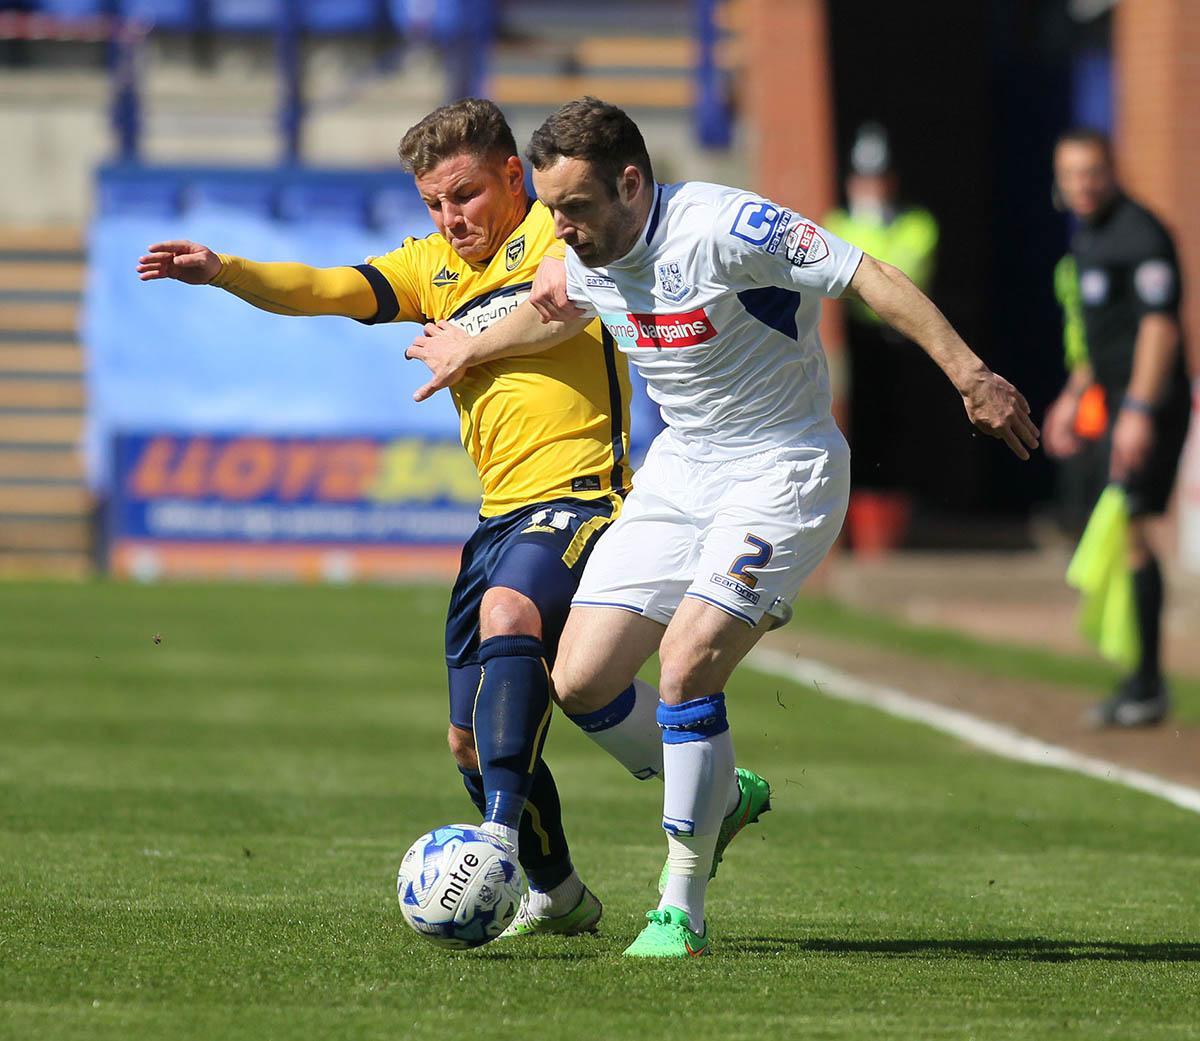 Pictures form Oxford's 3-0 Victory away to Tranmere